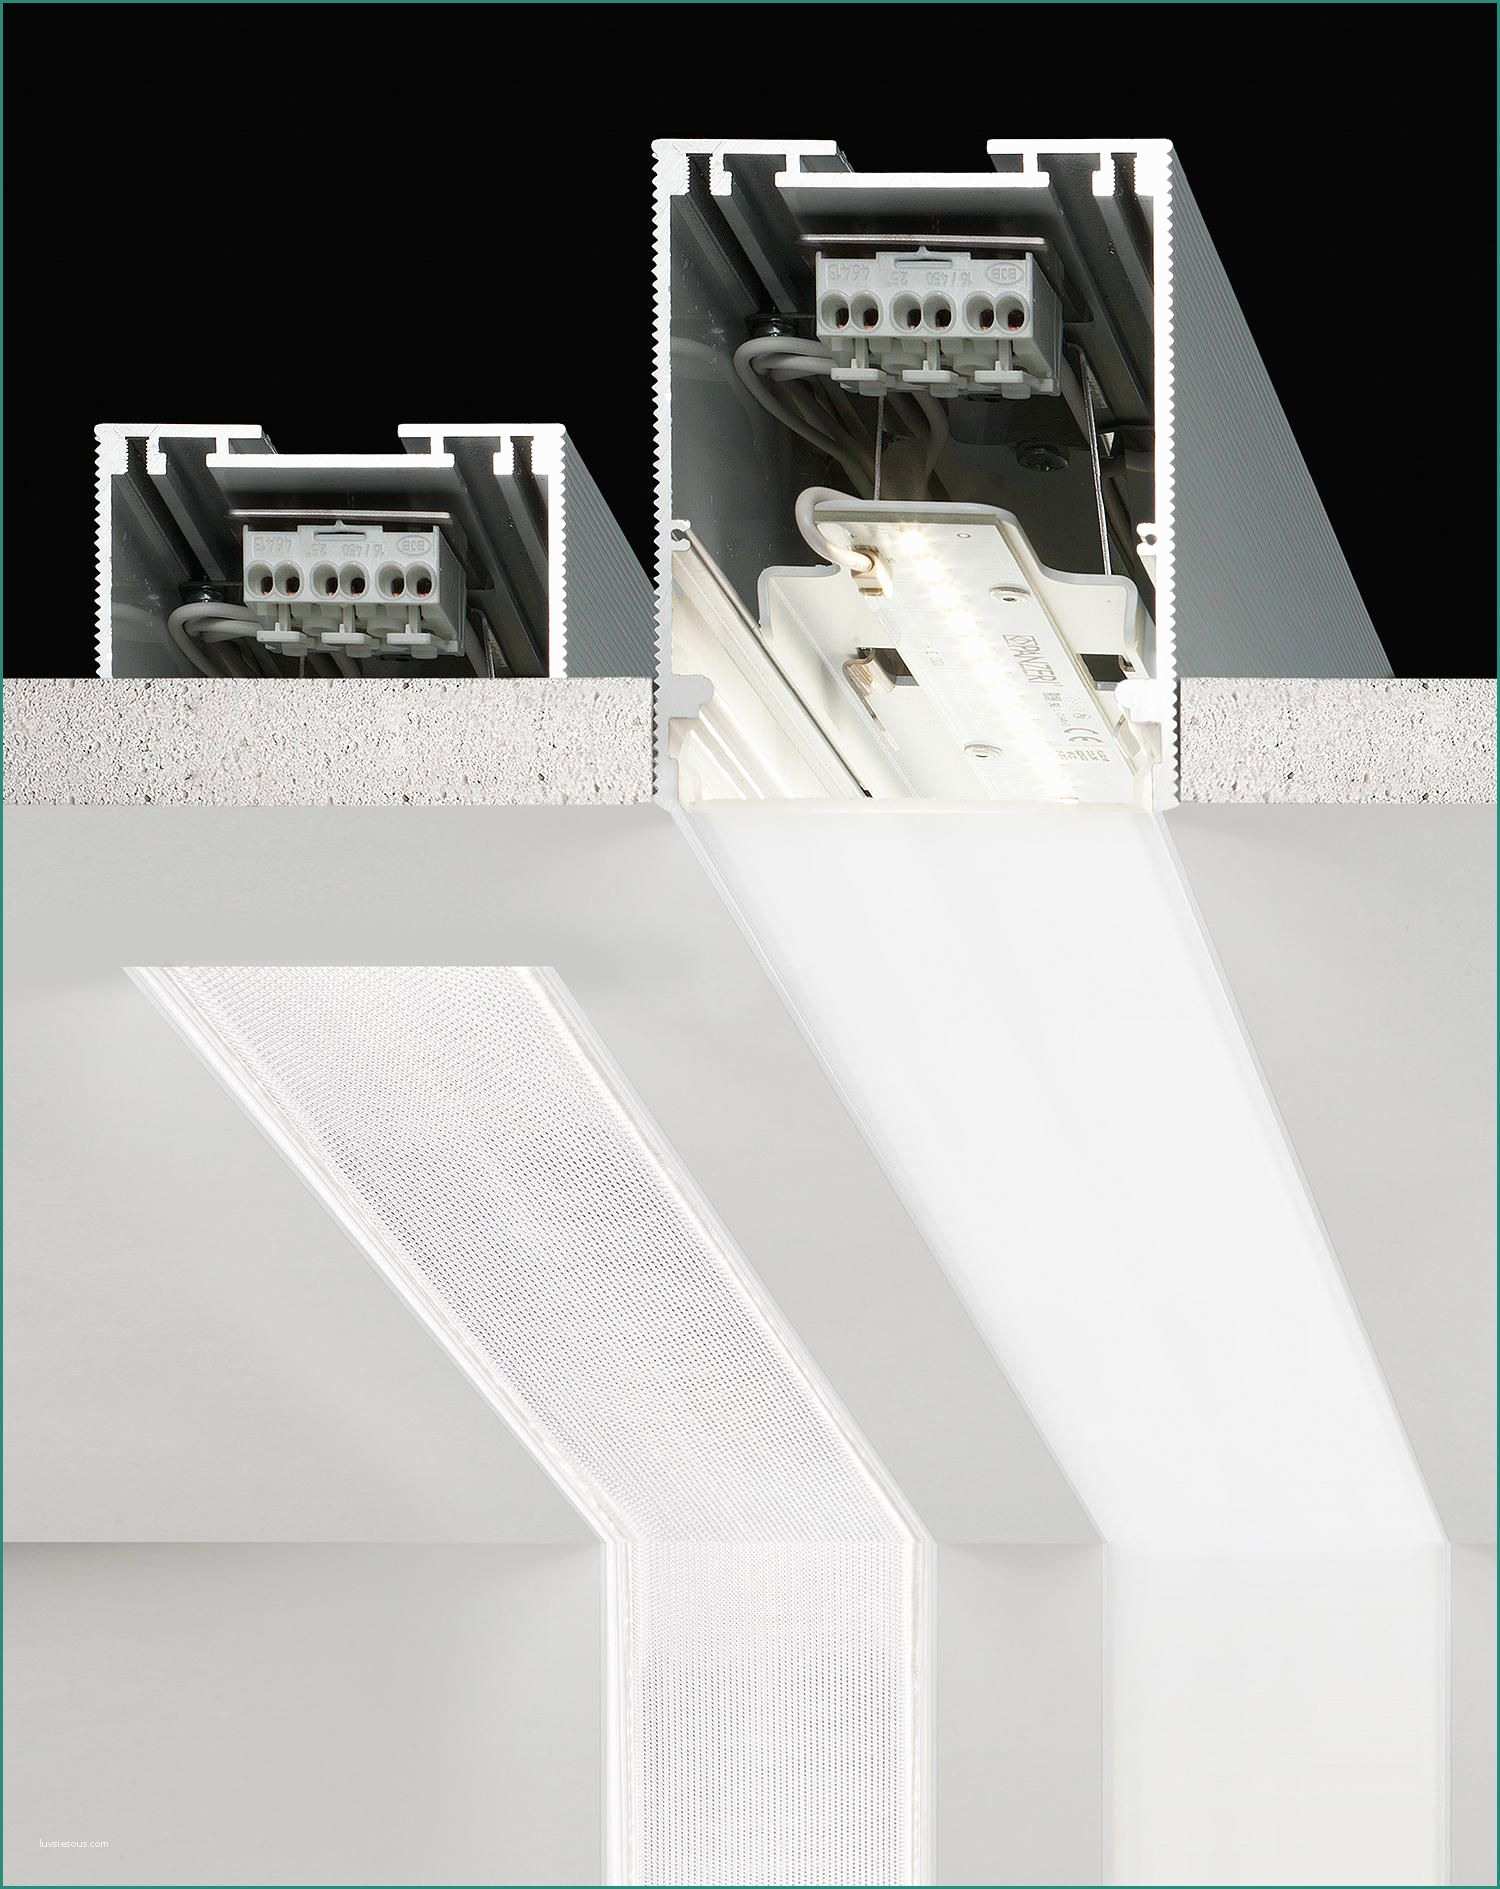 Illuminazione Giardino Leroy Merlin E Lighting System In the Recessed or Suspension Wall Ceiling Version